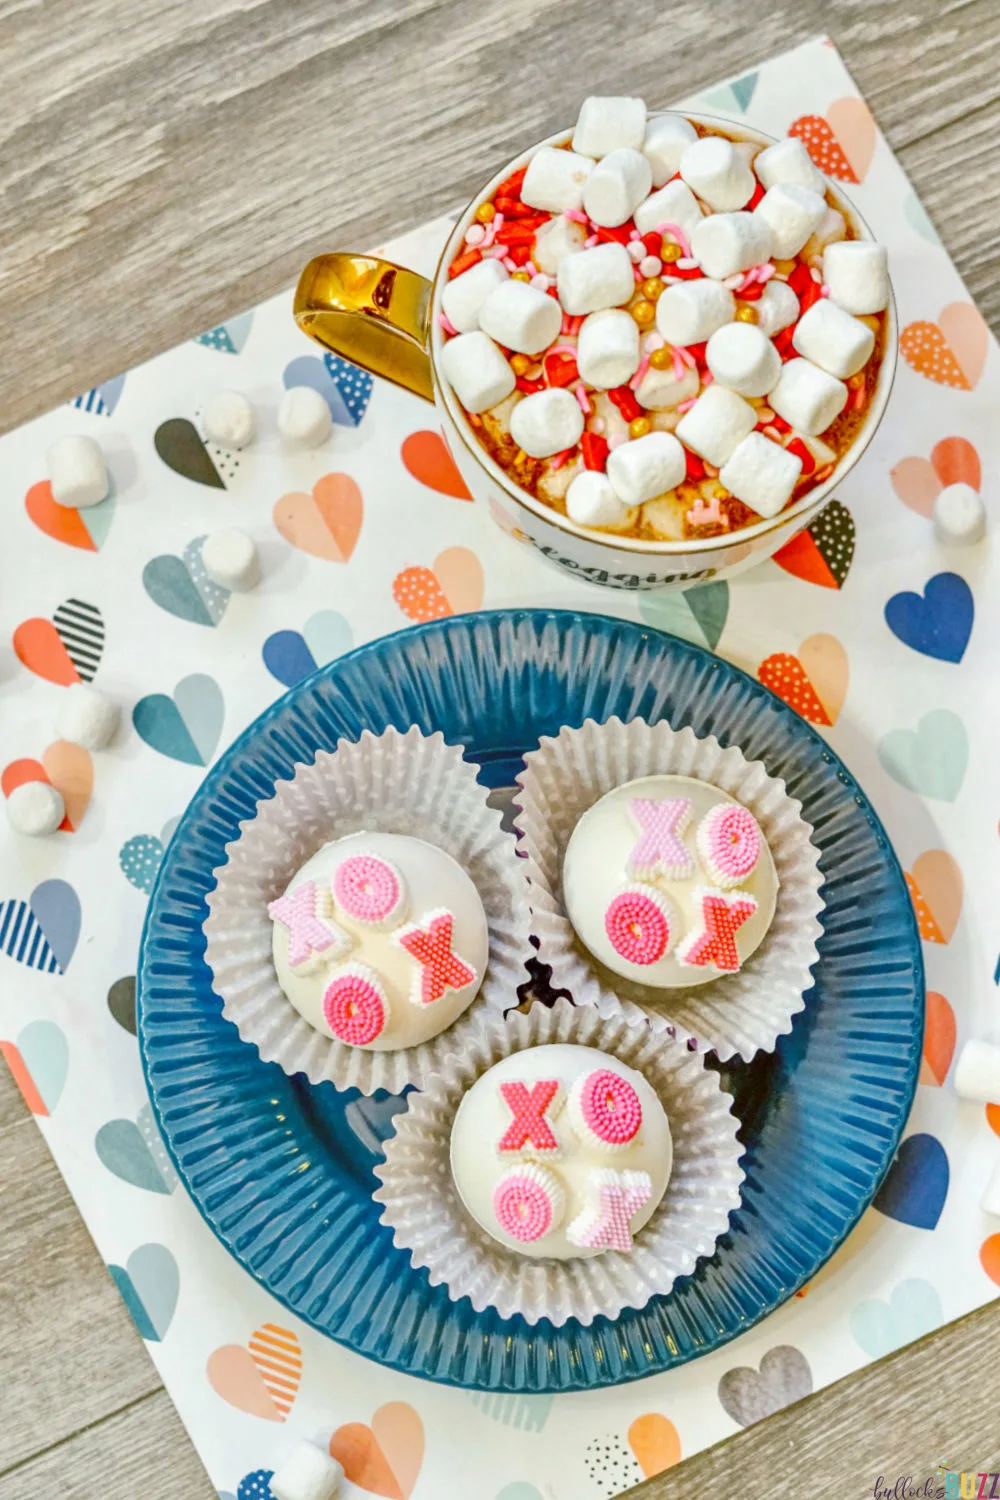 These super cute homemade hot cocoa bombs are fun to make and to drink. Plus they make a great Valentine's or Galentine's gift!